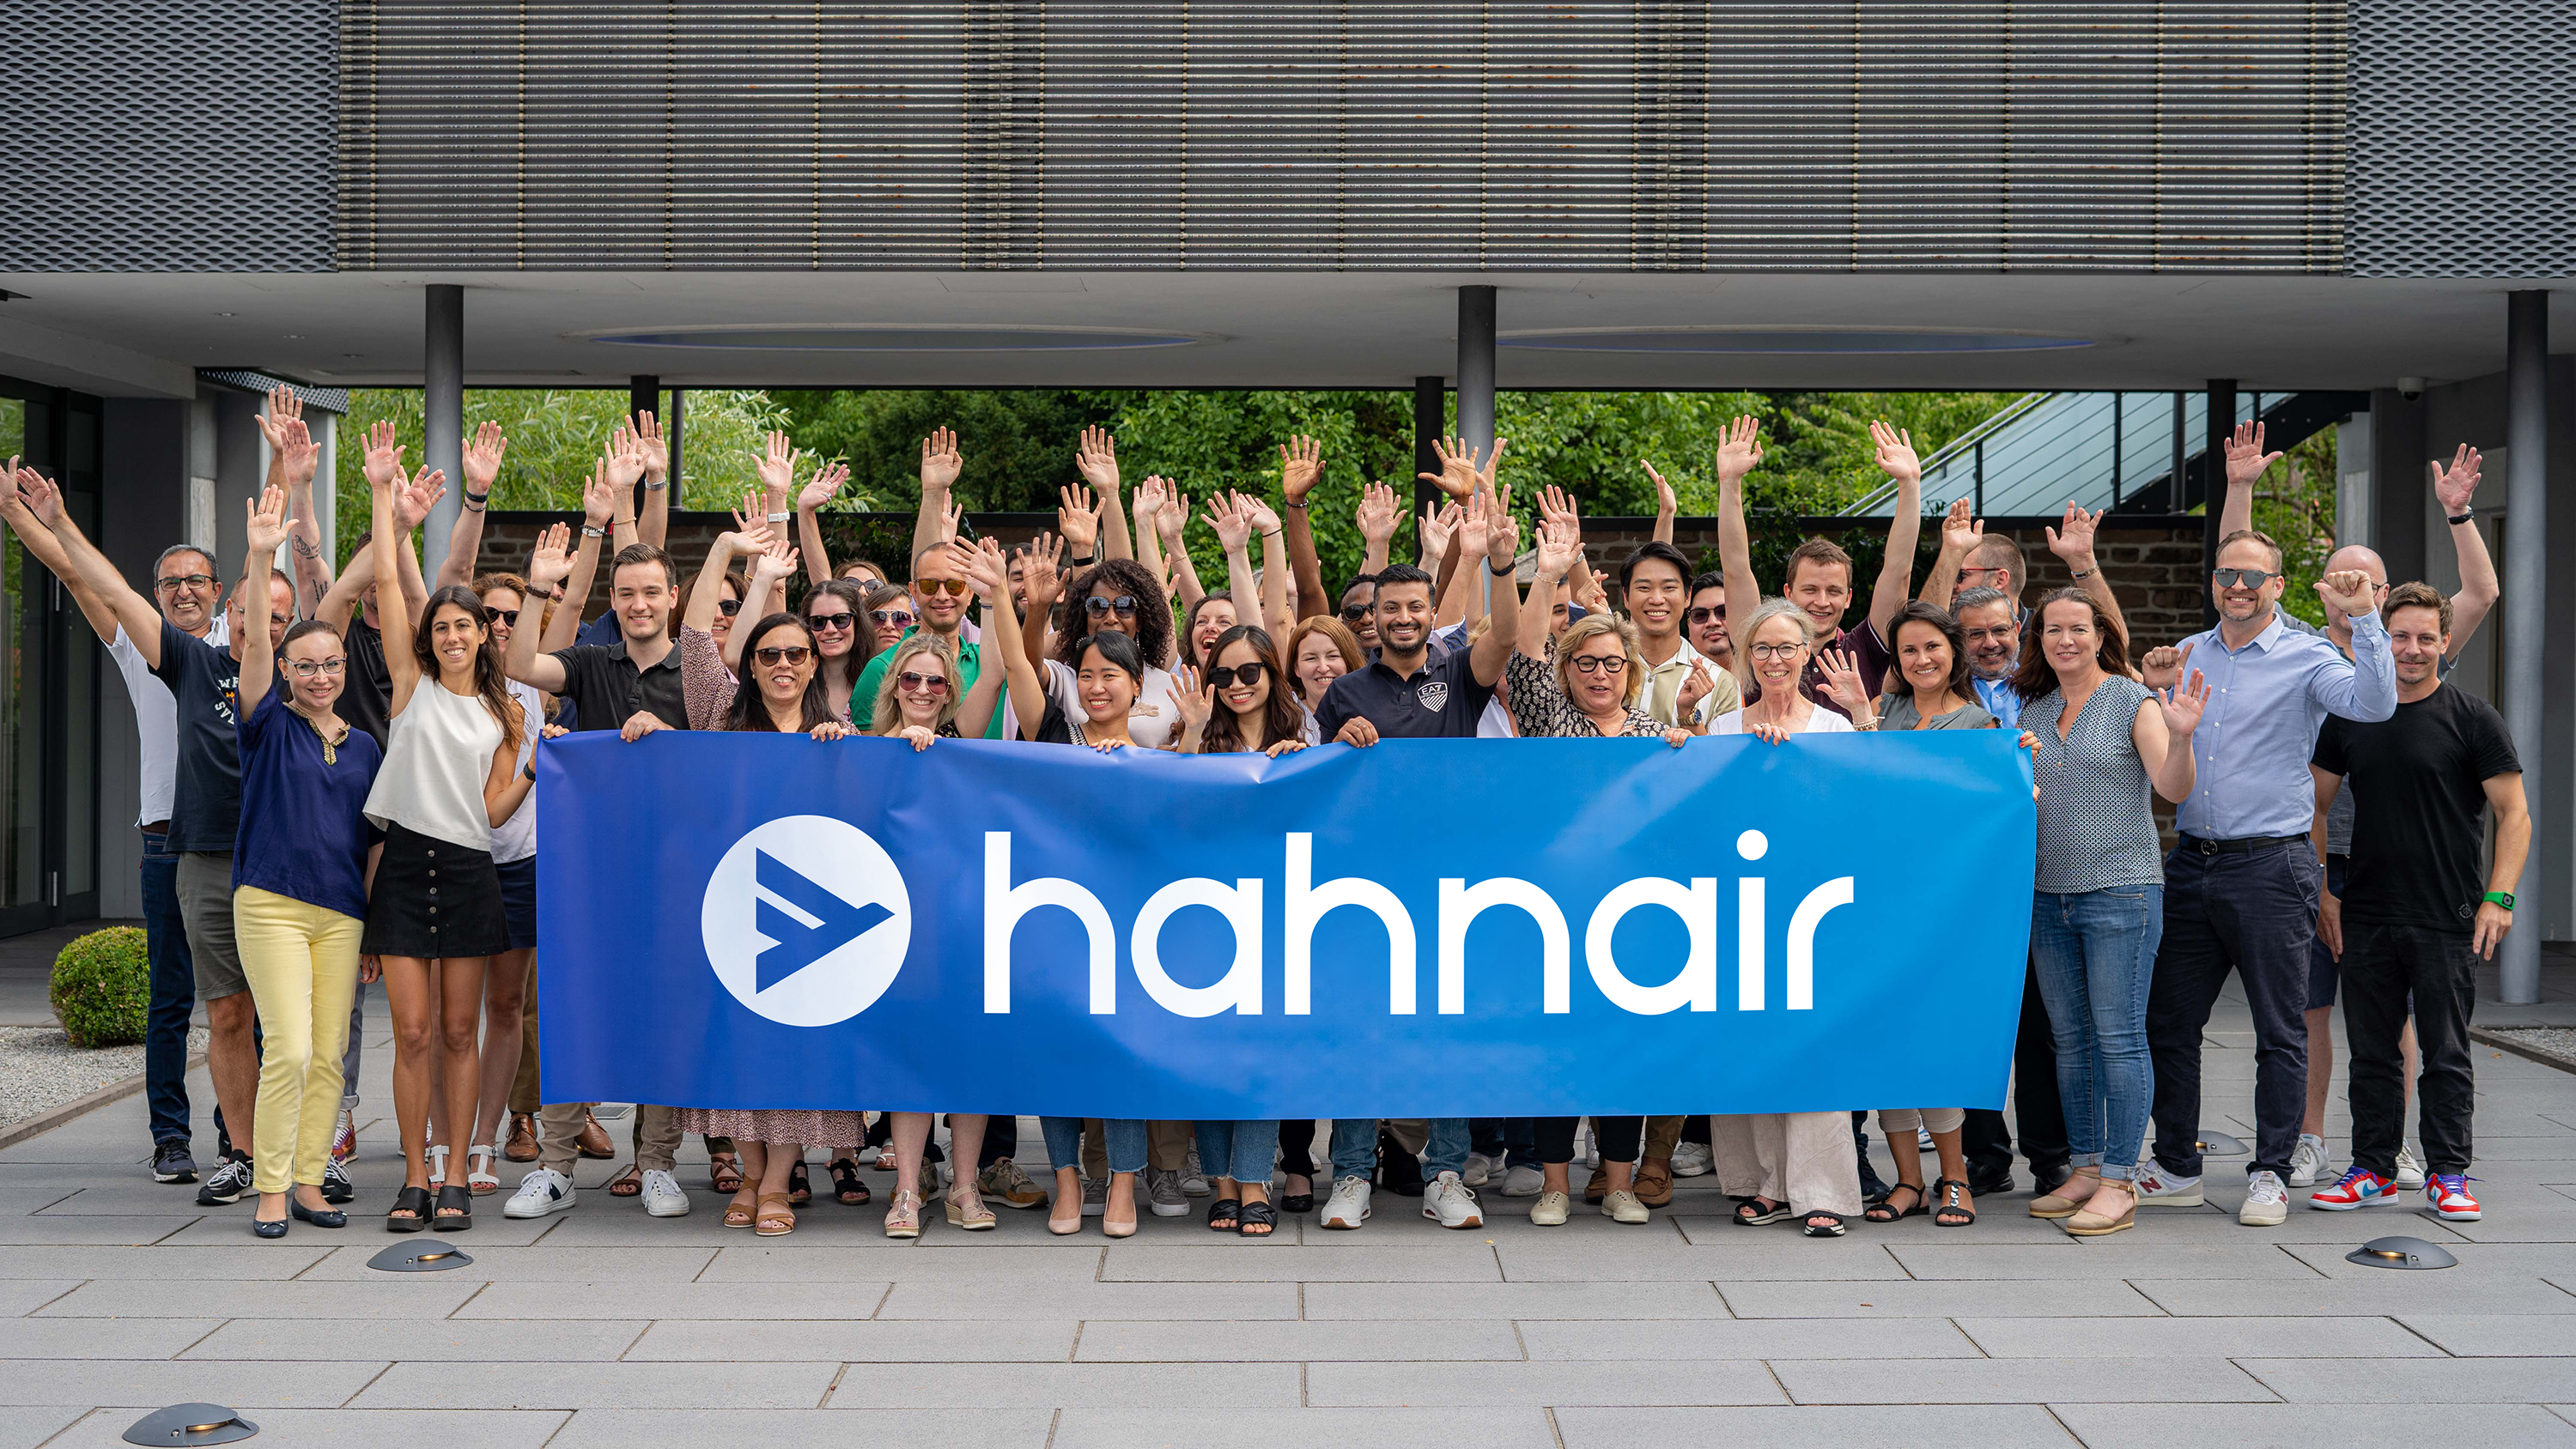 Hahnair celebrates its 25th anniversary with a new brand identity